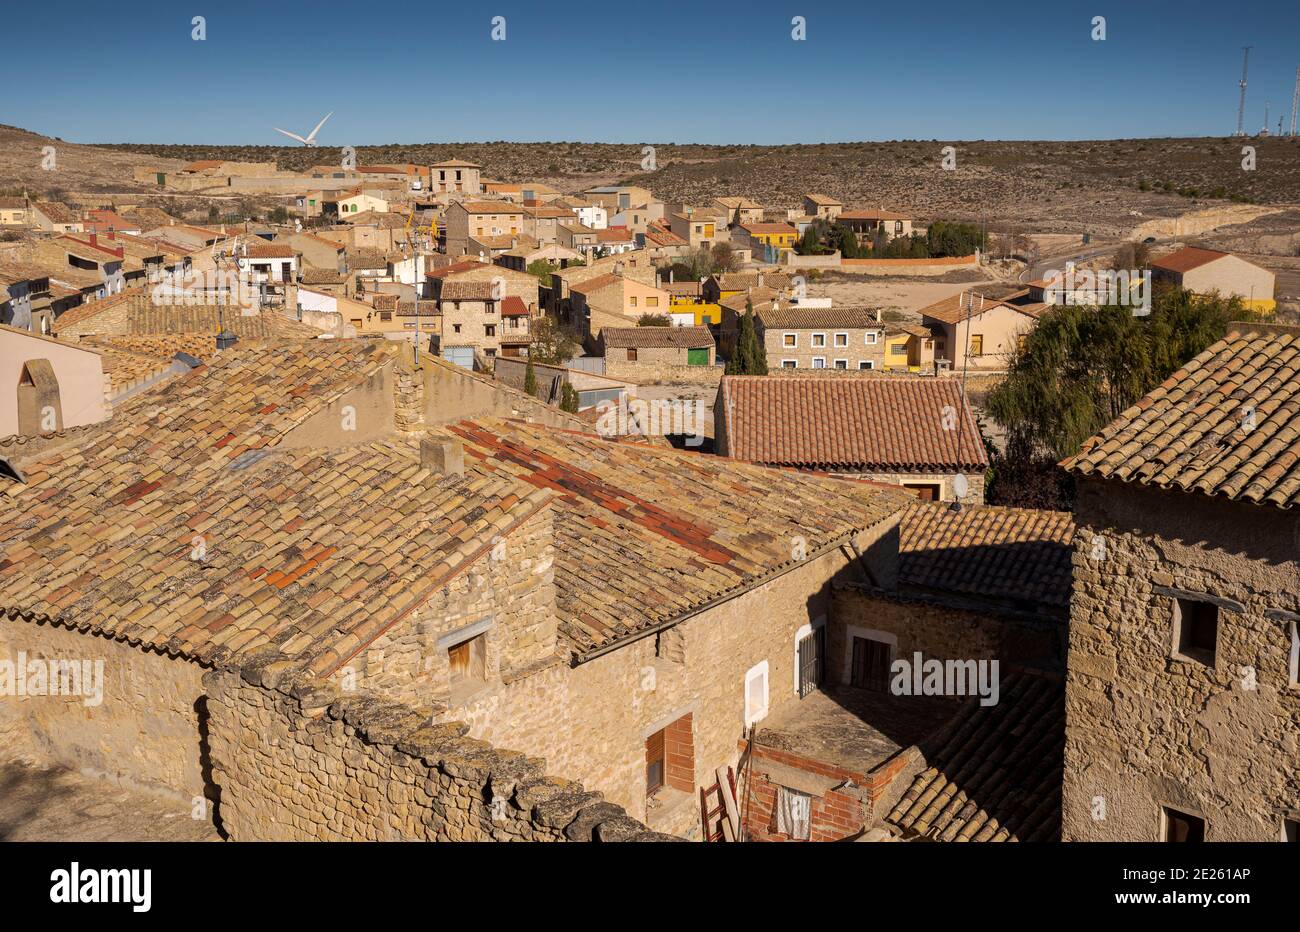 Views of Fuendetodos, a small village in the province of Zaragoza, Spain. It is known for being the birthplace of the painter Francisco de Goya Stock Photo